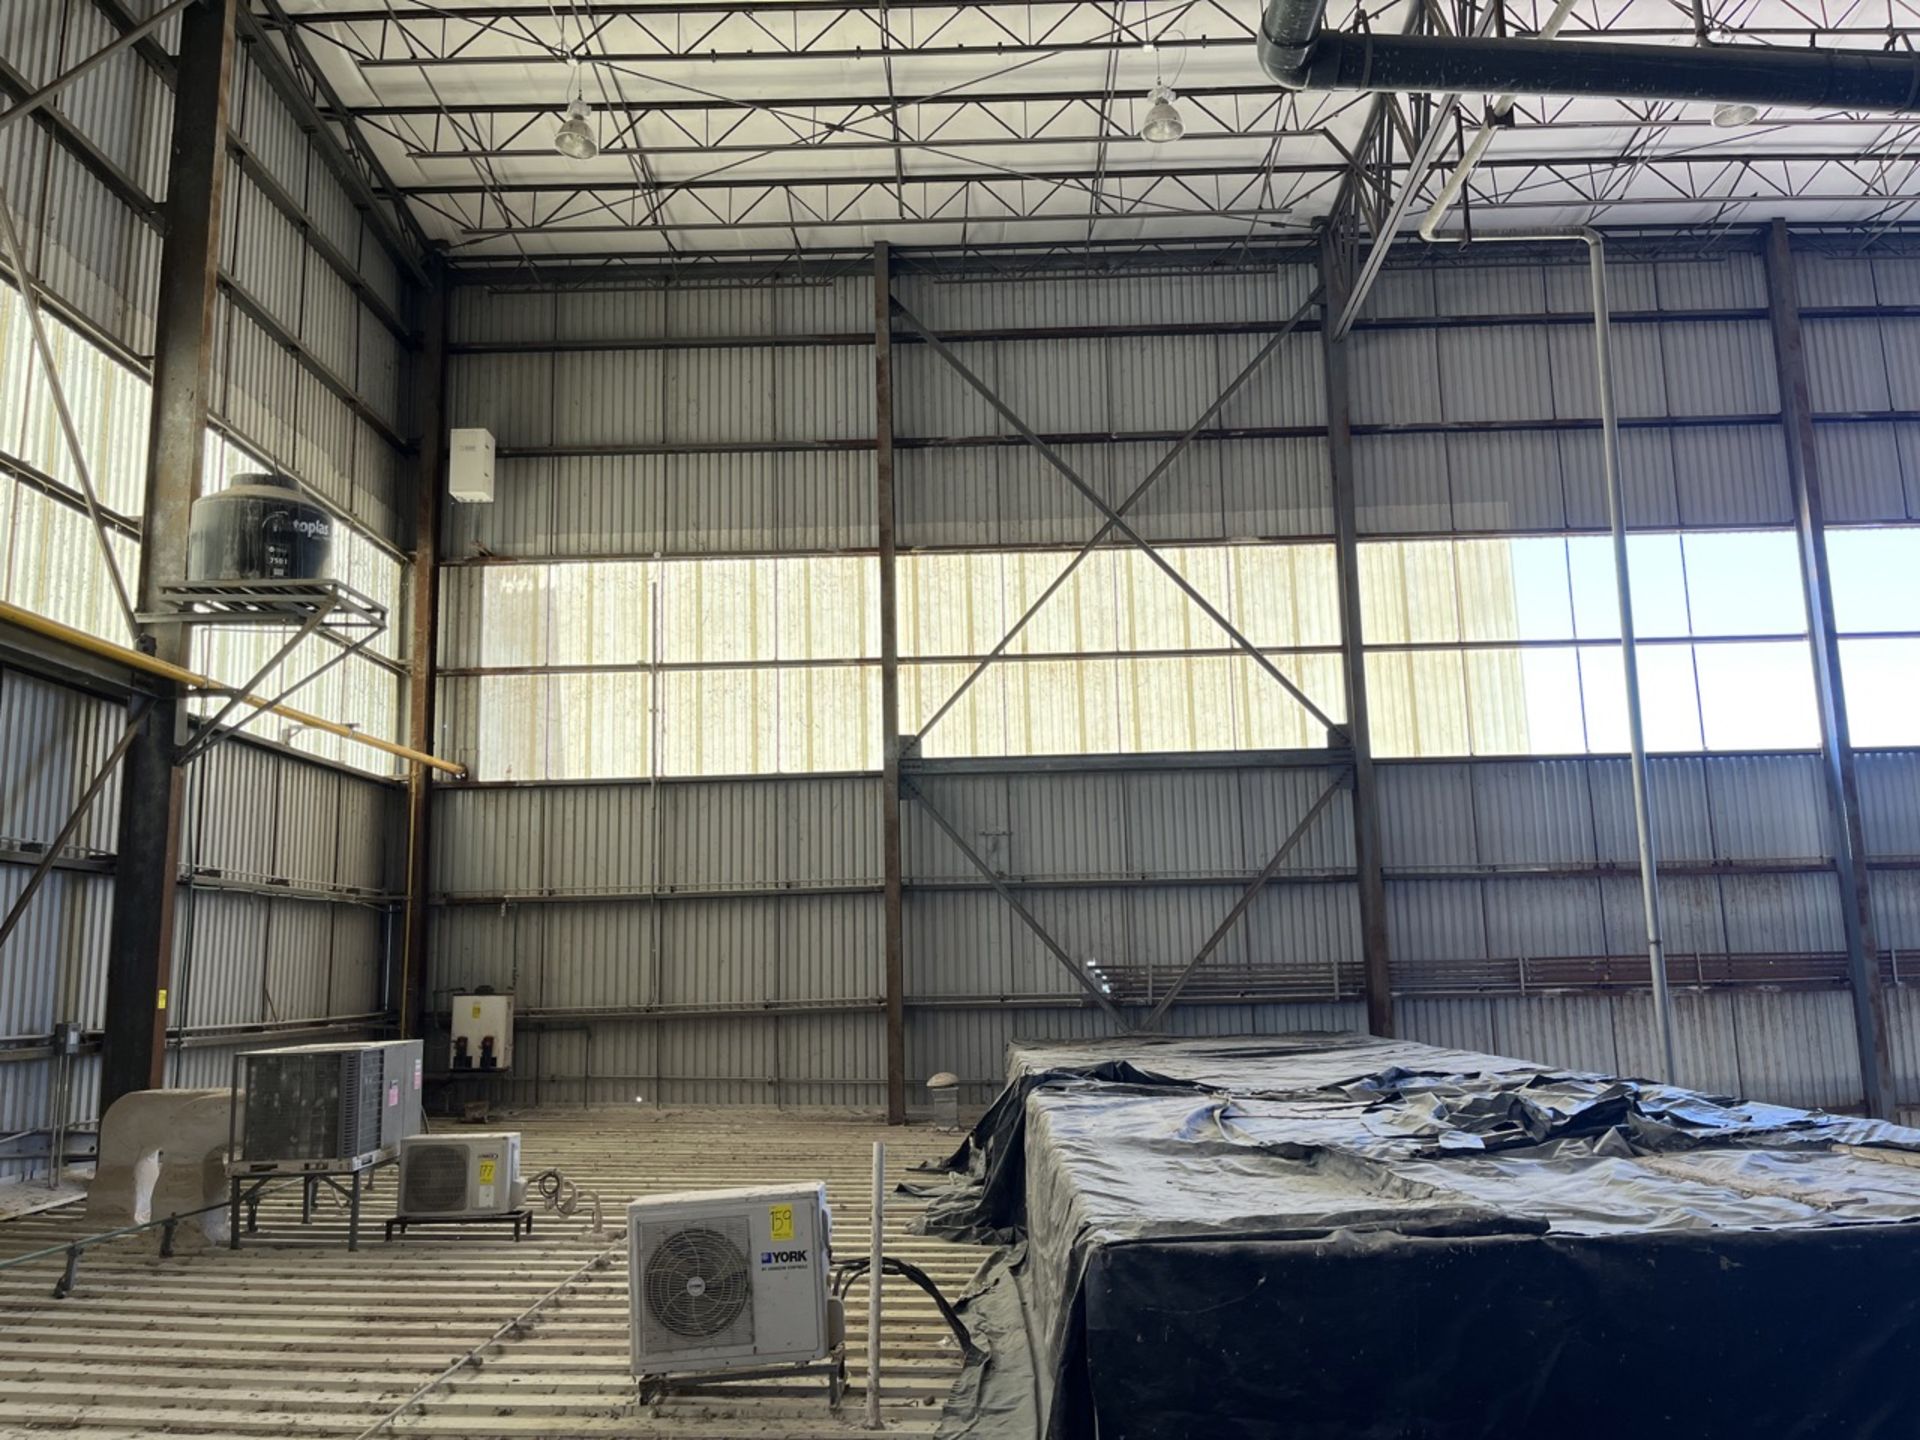 Complete Industrial Warehouse Structure - Image 106 of 141